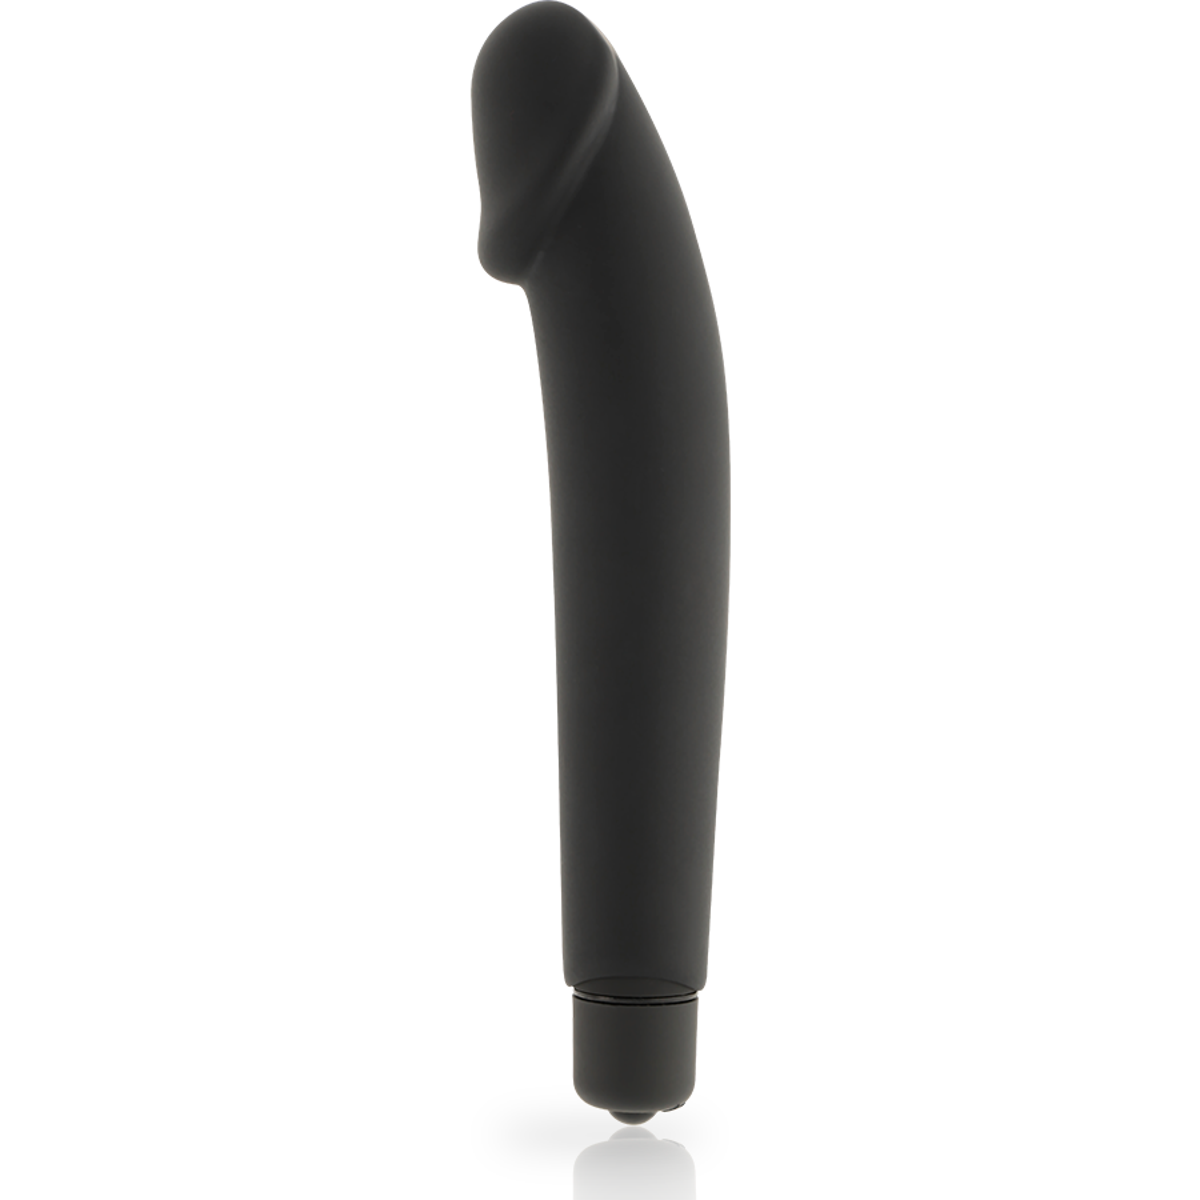 G-Punkt Vibrator "Realistic Pink Silicone" - OH MY! FANTASY